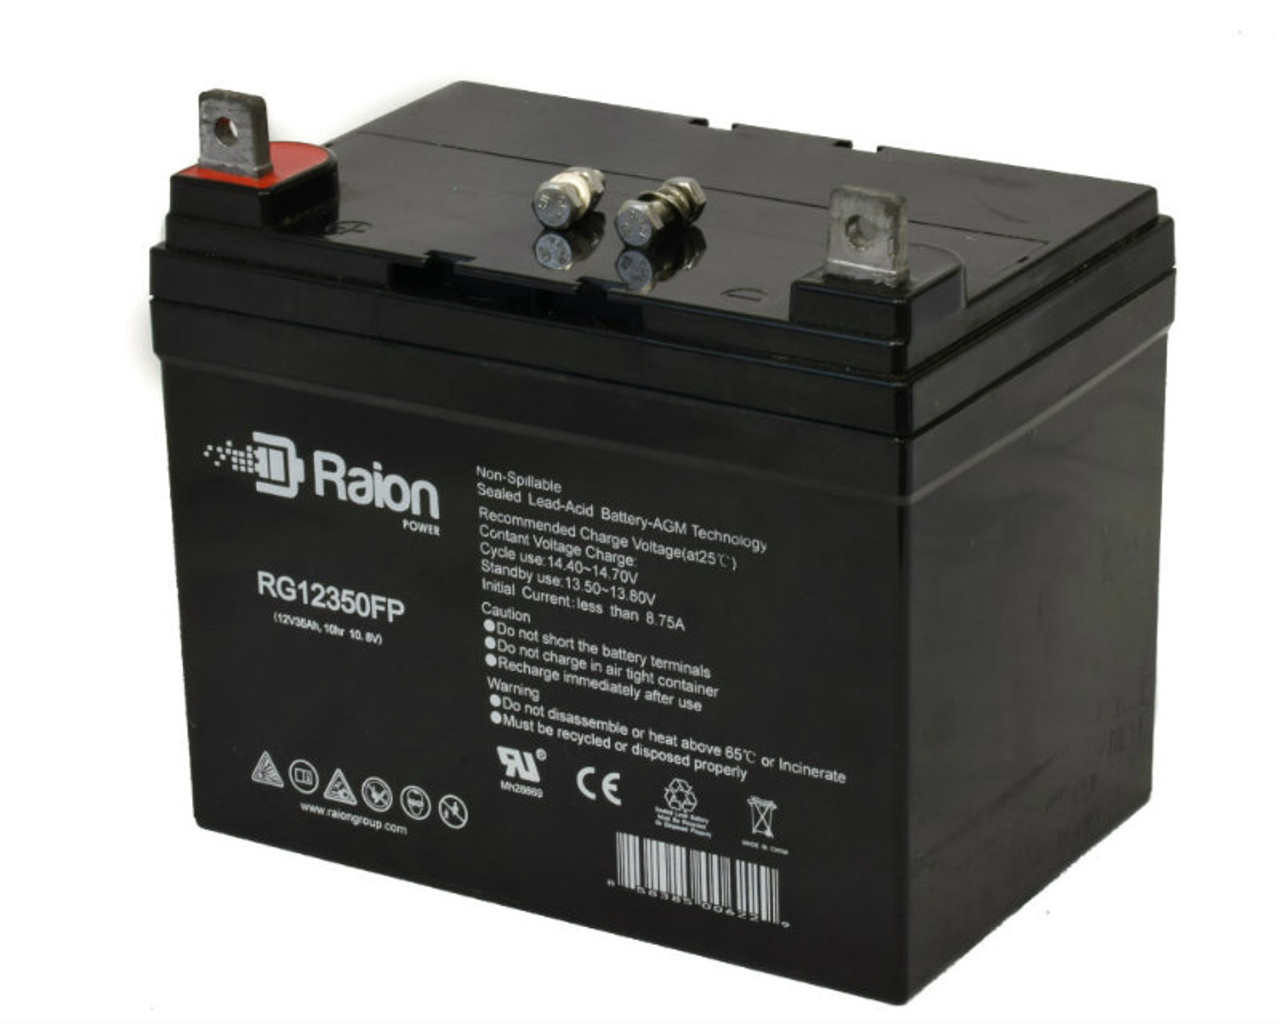 Raion Power Replacement 12V 35Ah RG12350FP Battery for Sabre (By John Deere) 2048HV